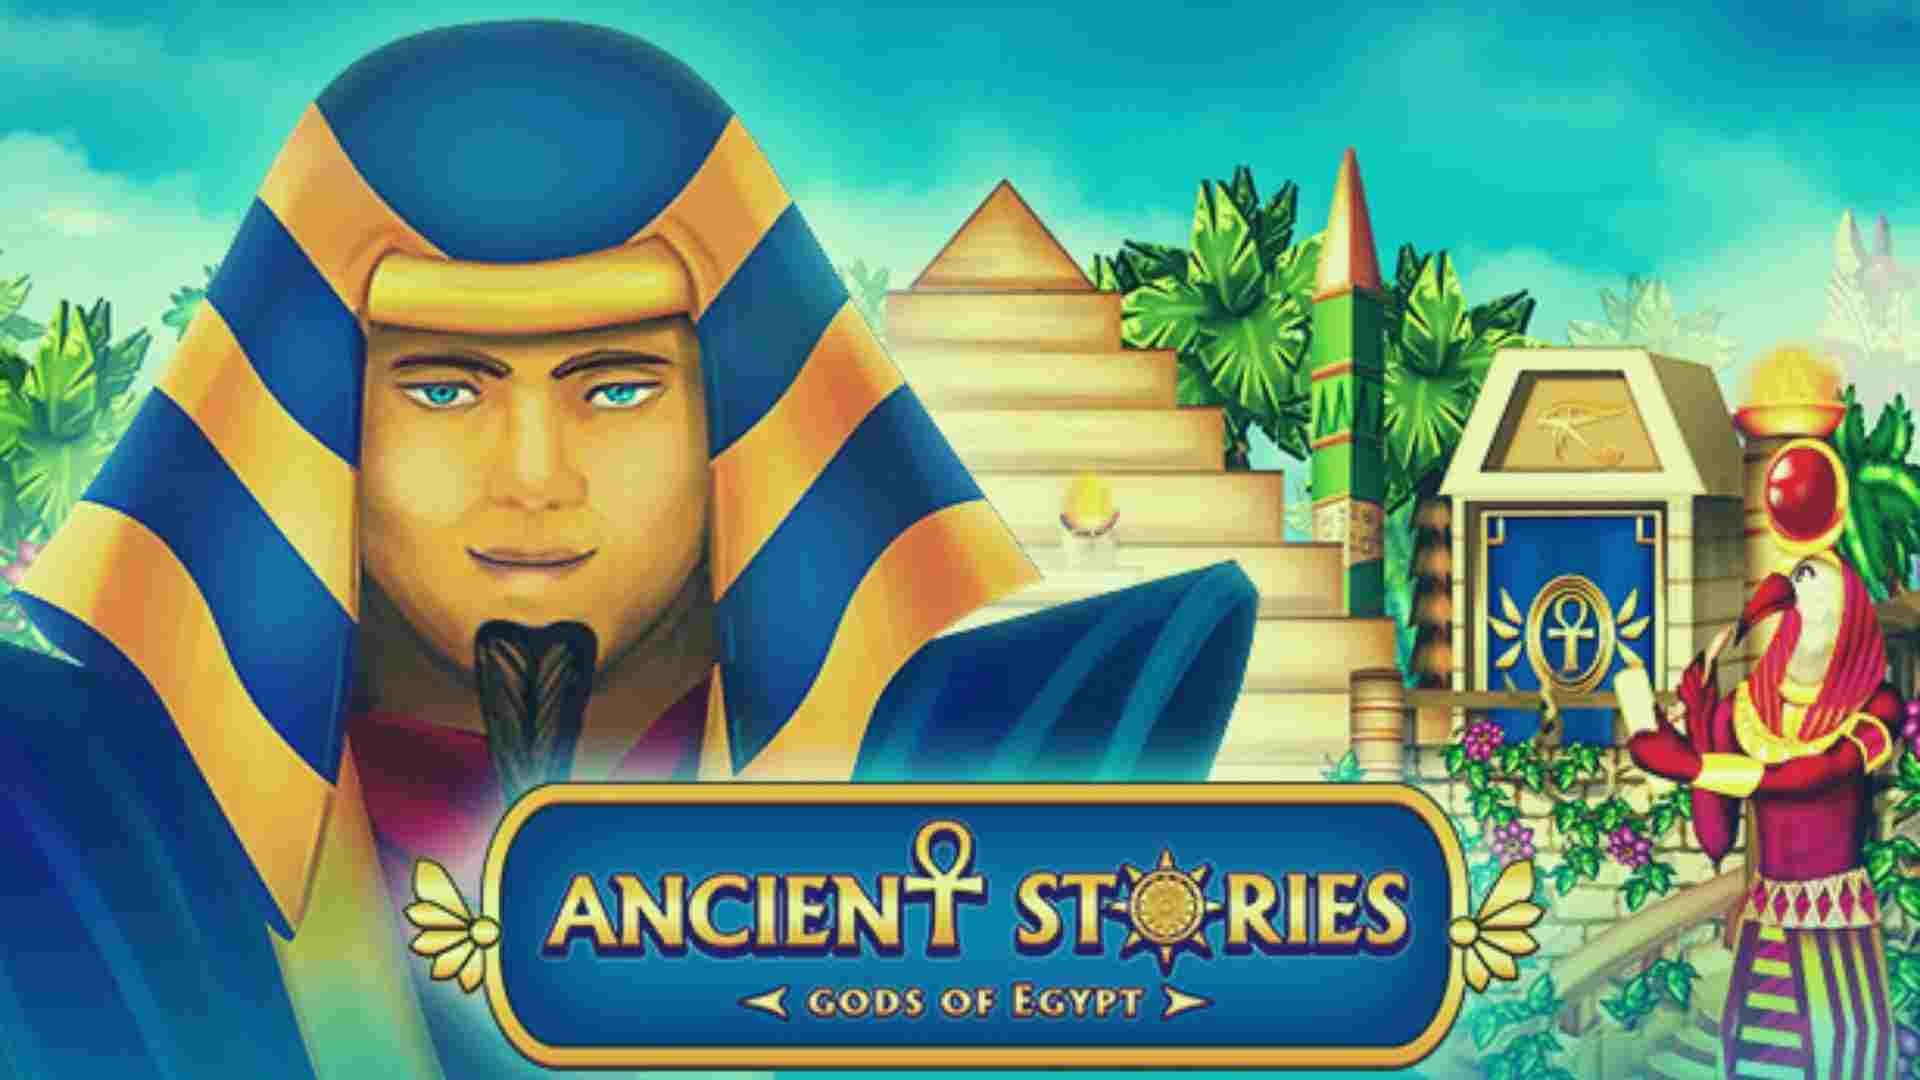 Ancient Stories: Gods of Egypt Game Review, Gameplay | 2019